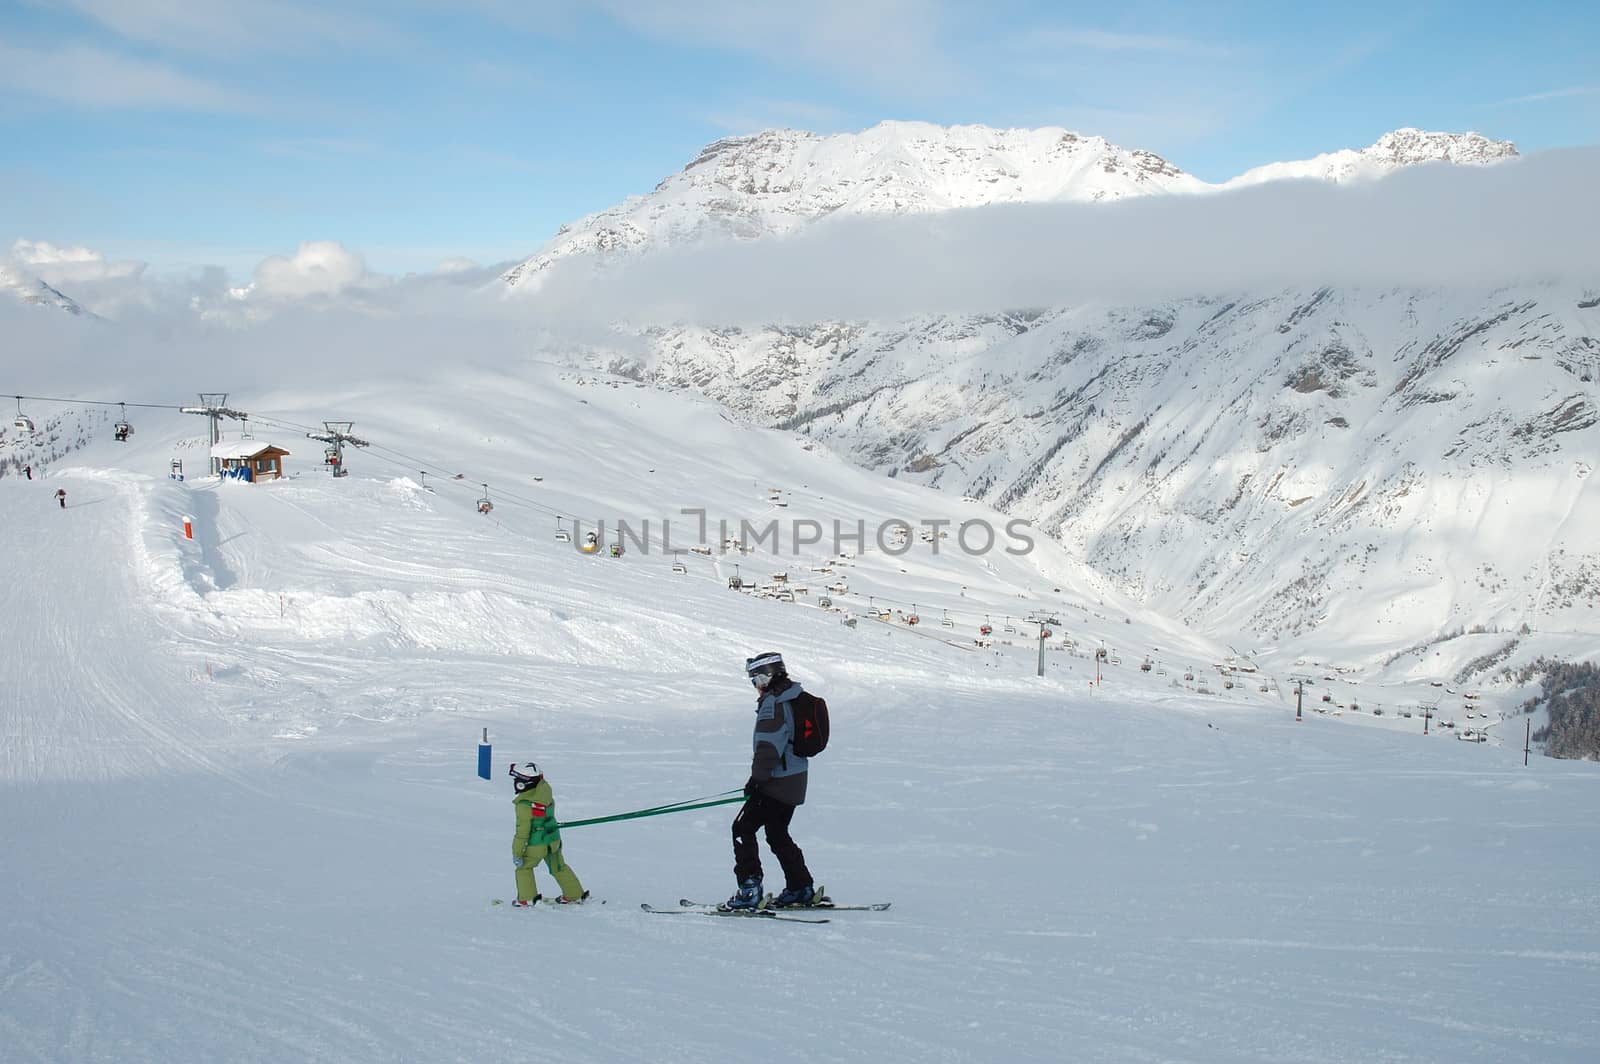 Learning to ski by janhetman